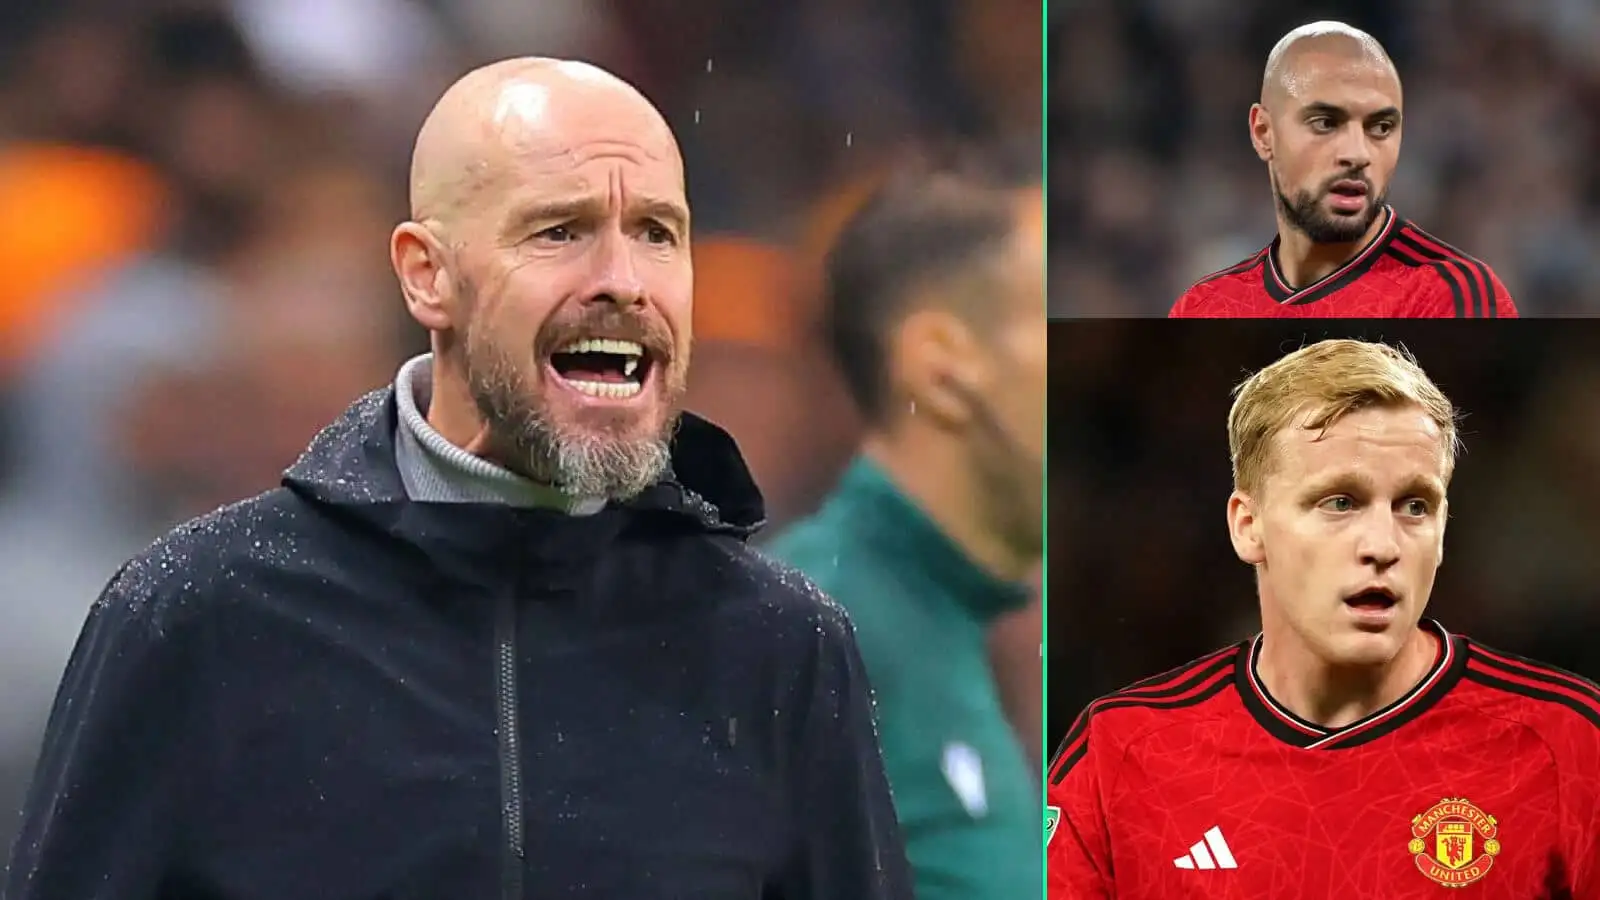 Furious Ten Hag brutally tells Man Utd flop to leave and moves to replace summer signing who has 'not shown his best'